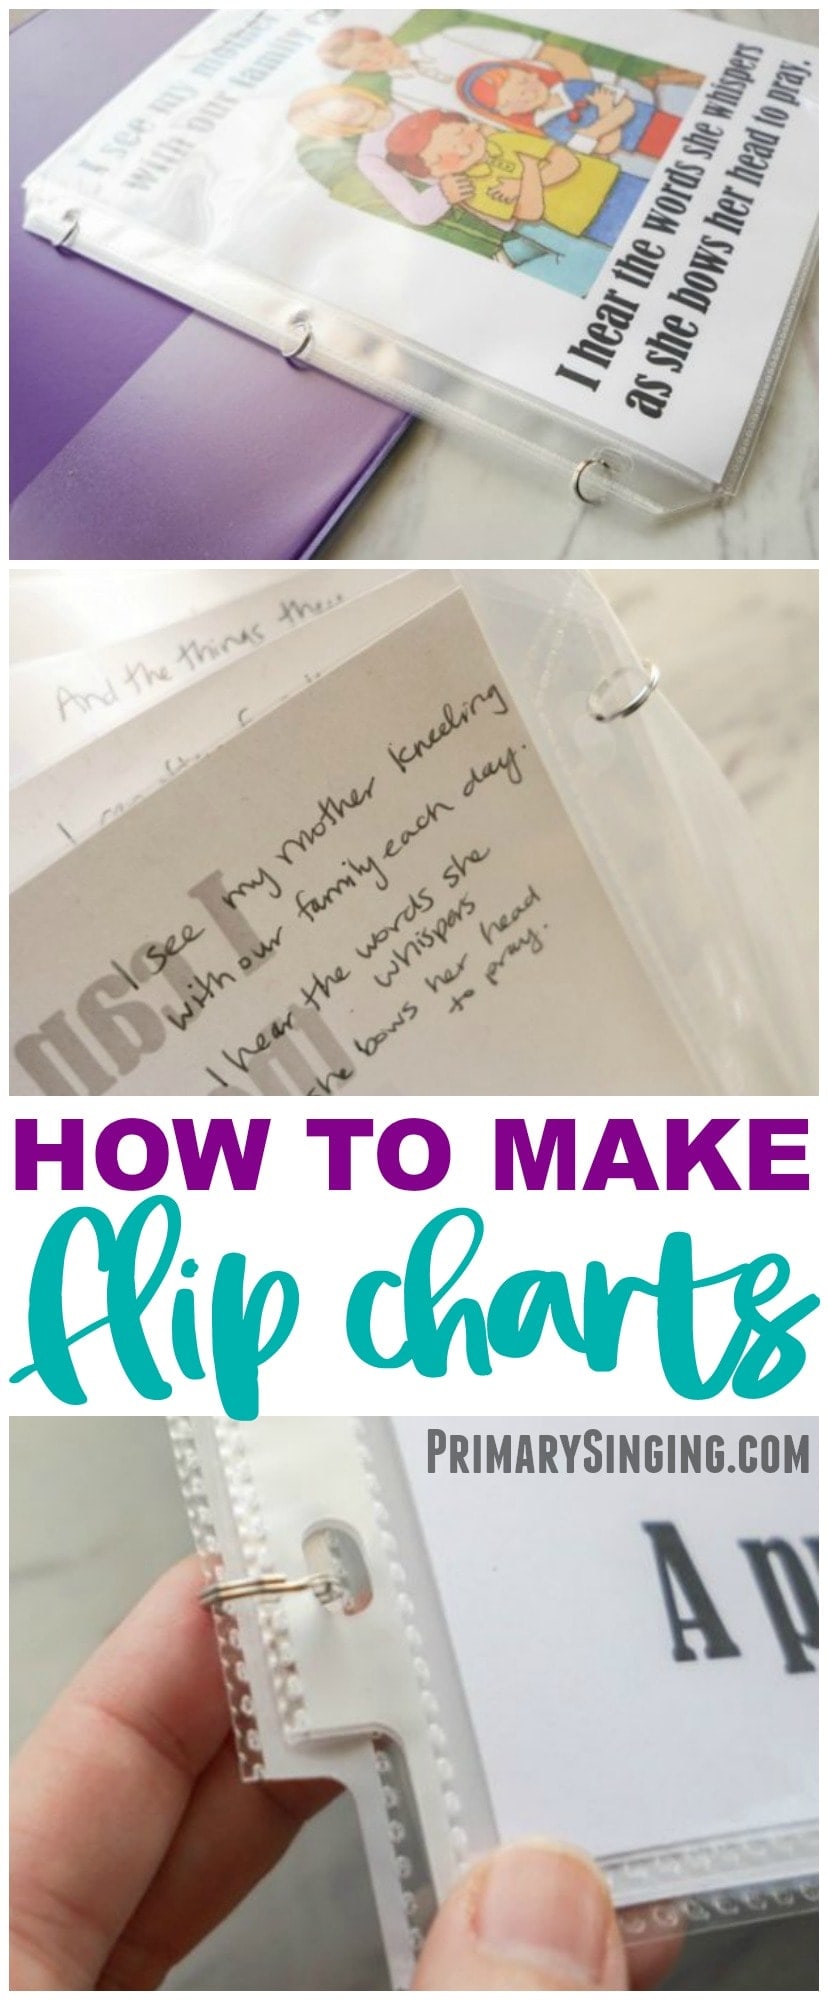 How to Make Flip Charts for Primary Singing Time - great resource for music leaders and Primary choristers to use flip charts for Primary Music Leaders.